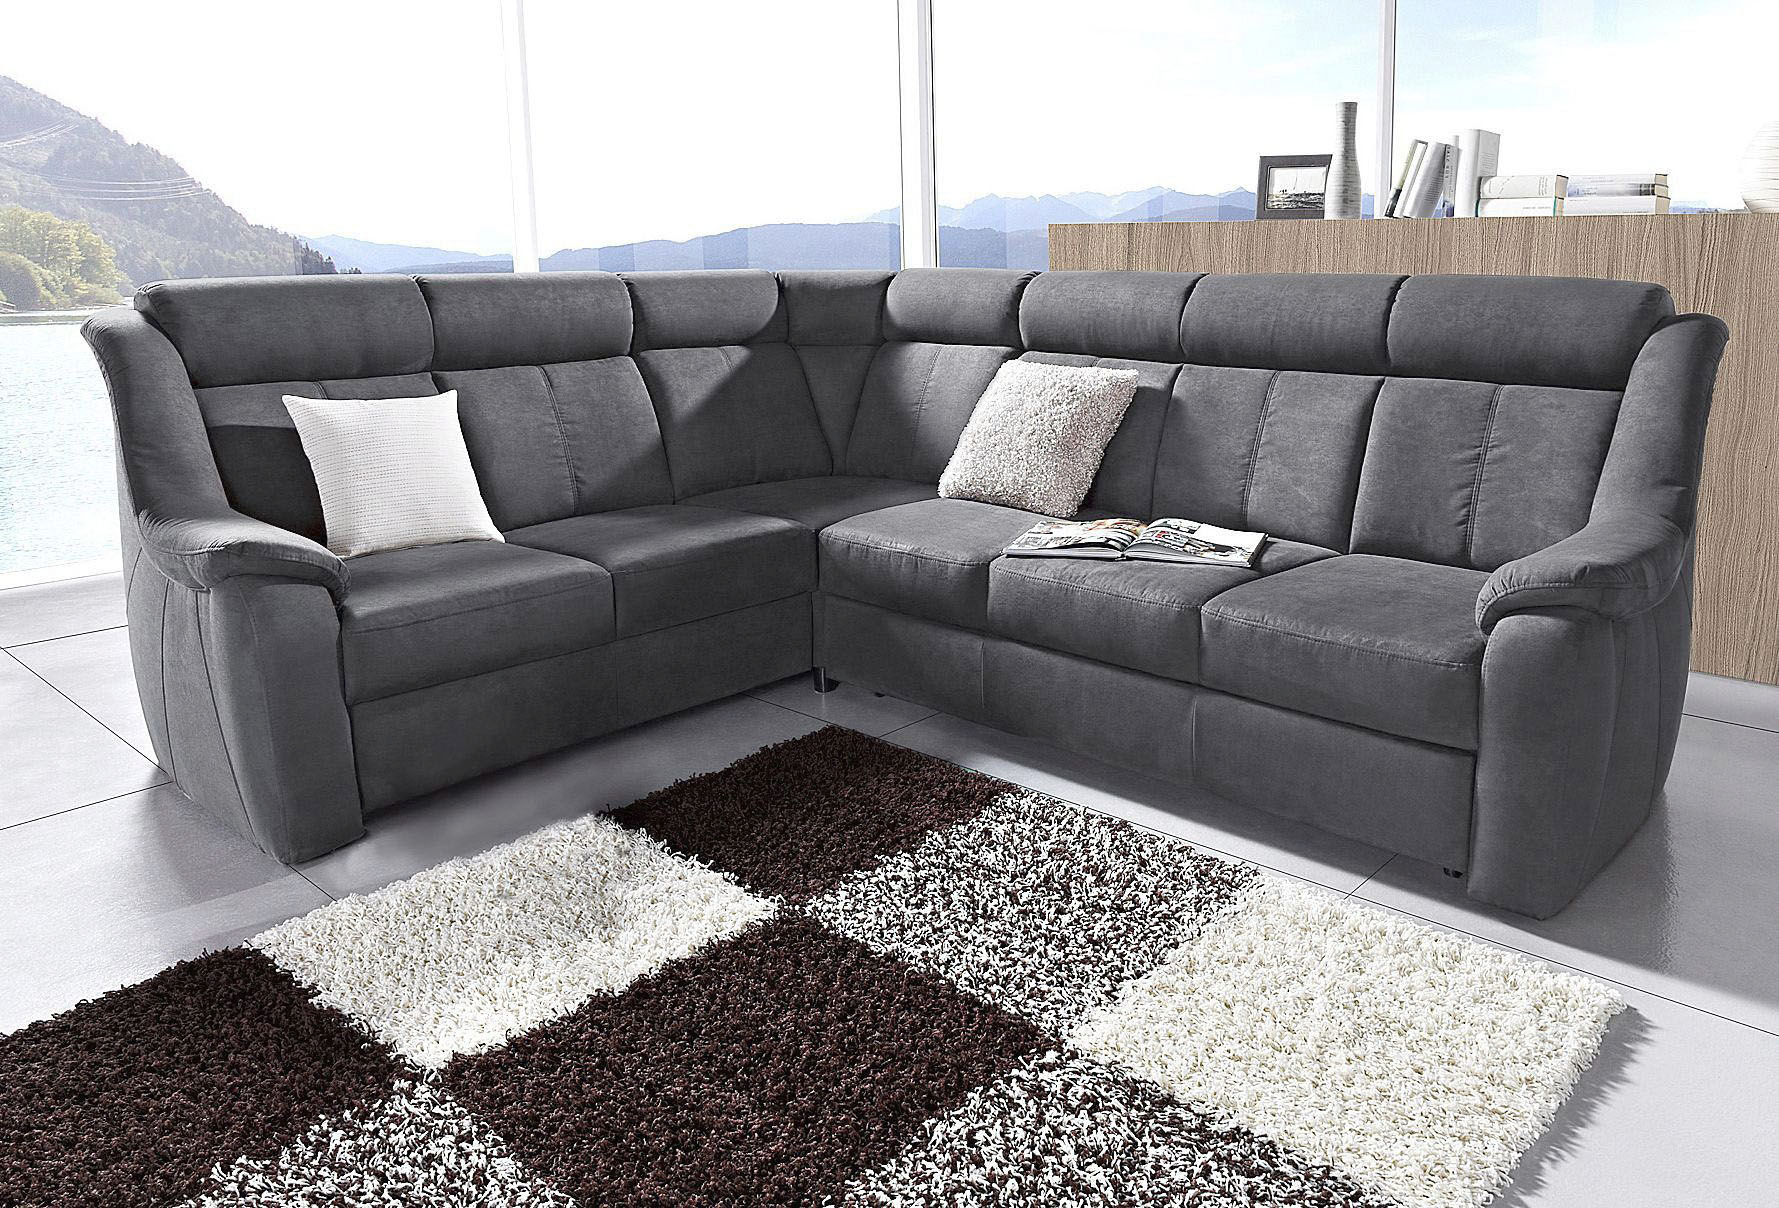 sit&more Ecksofa, wahlweise mit Relaxfunktion